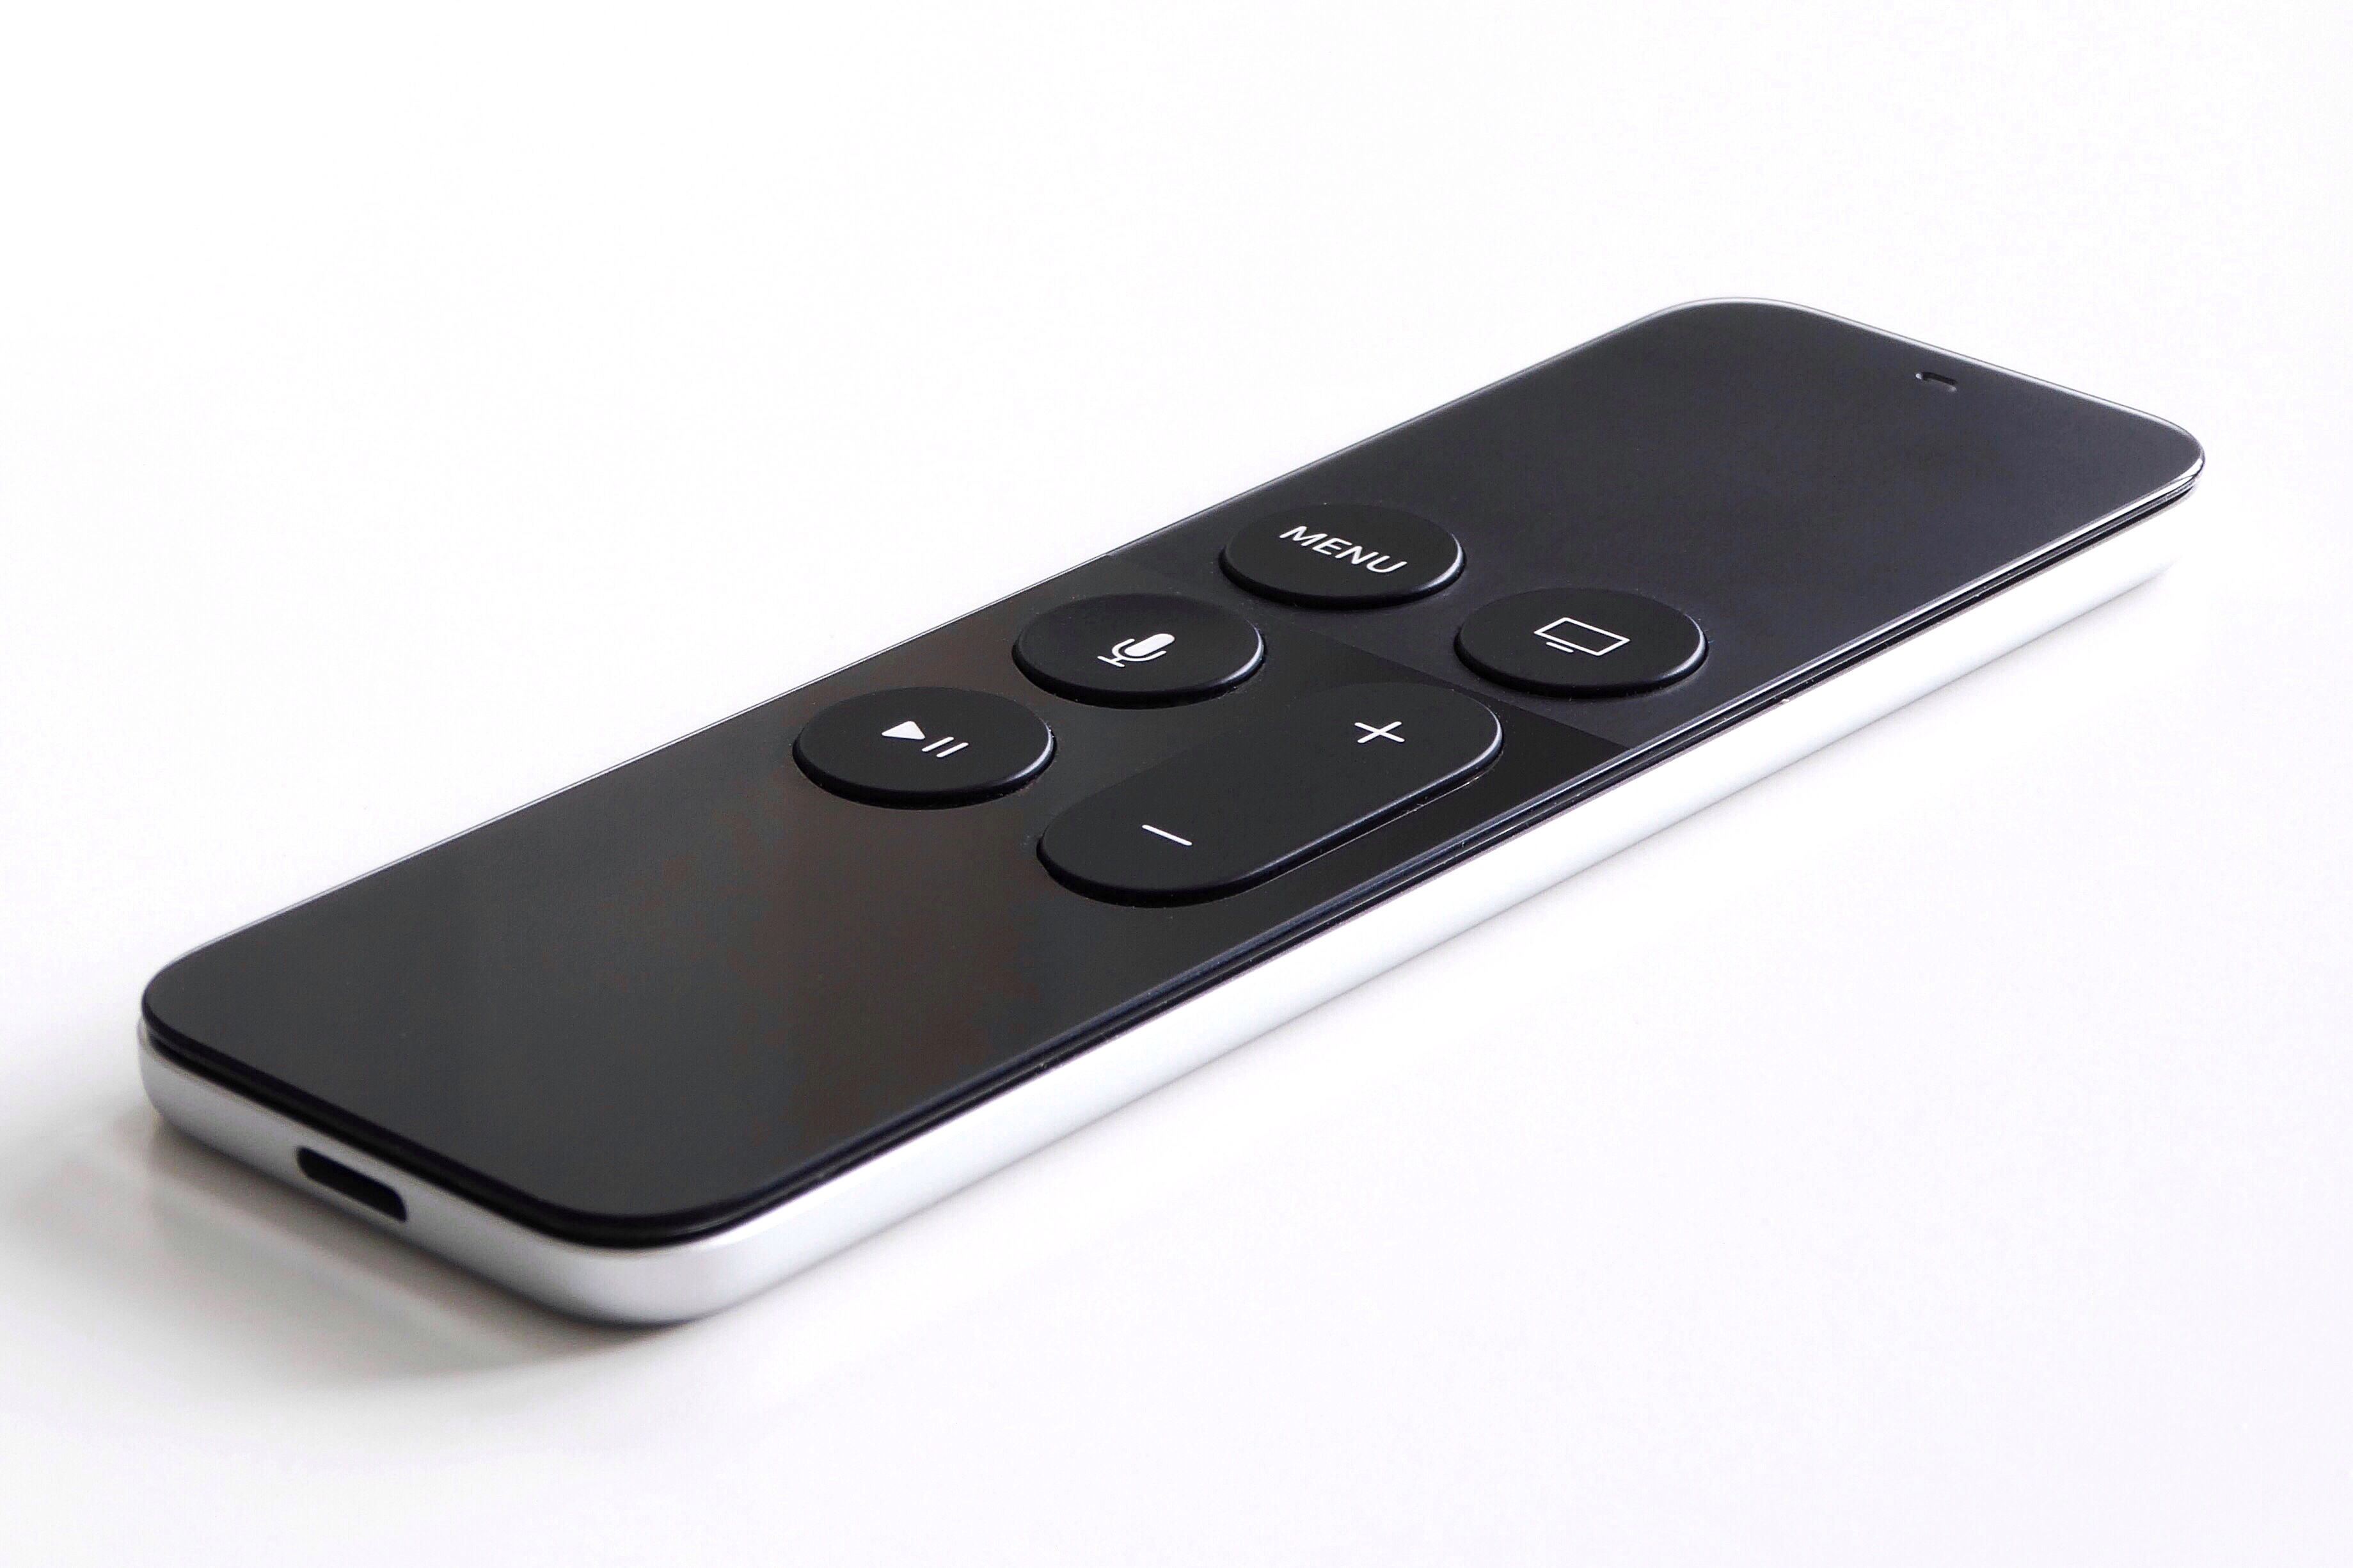 Jony Ive on Twitter: "How to charge your TV Siri Remote: 1. Attempt plug the Lightning cable into the infrared port. 2. Turn the remote around and plug